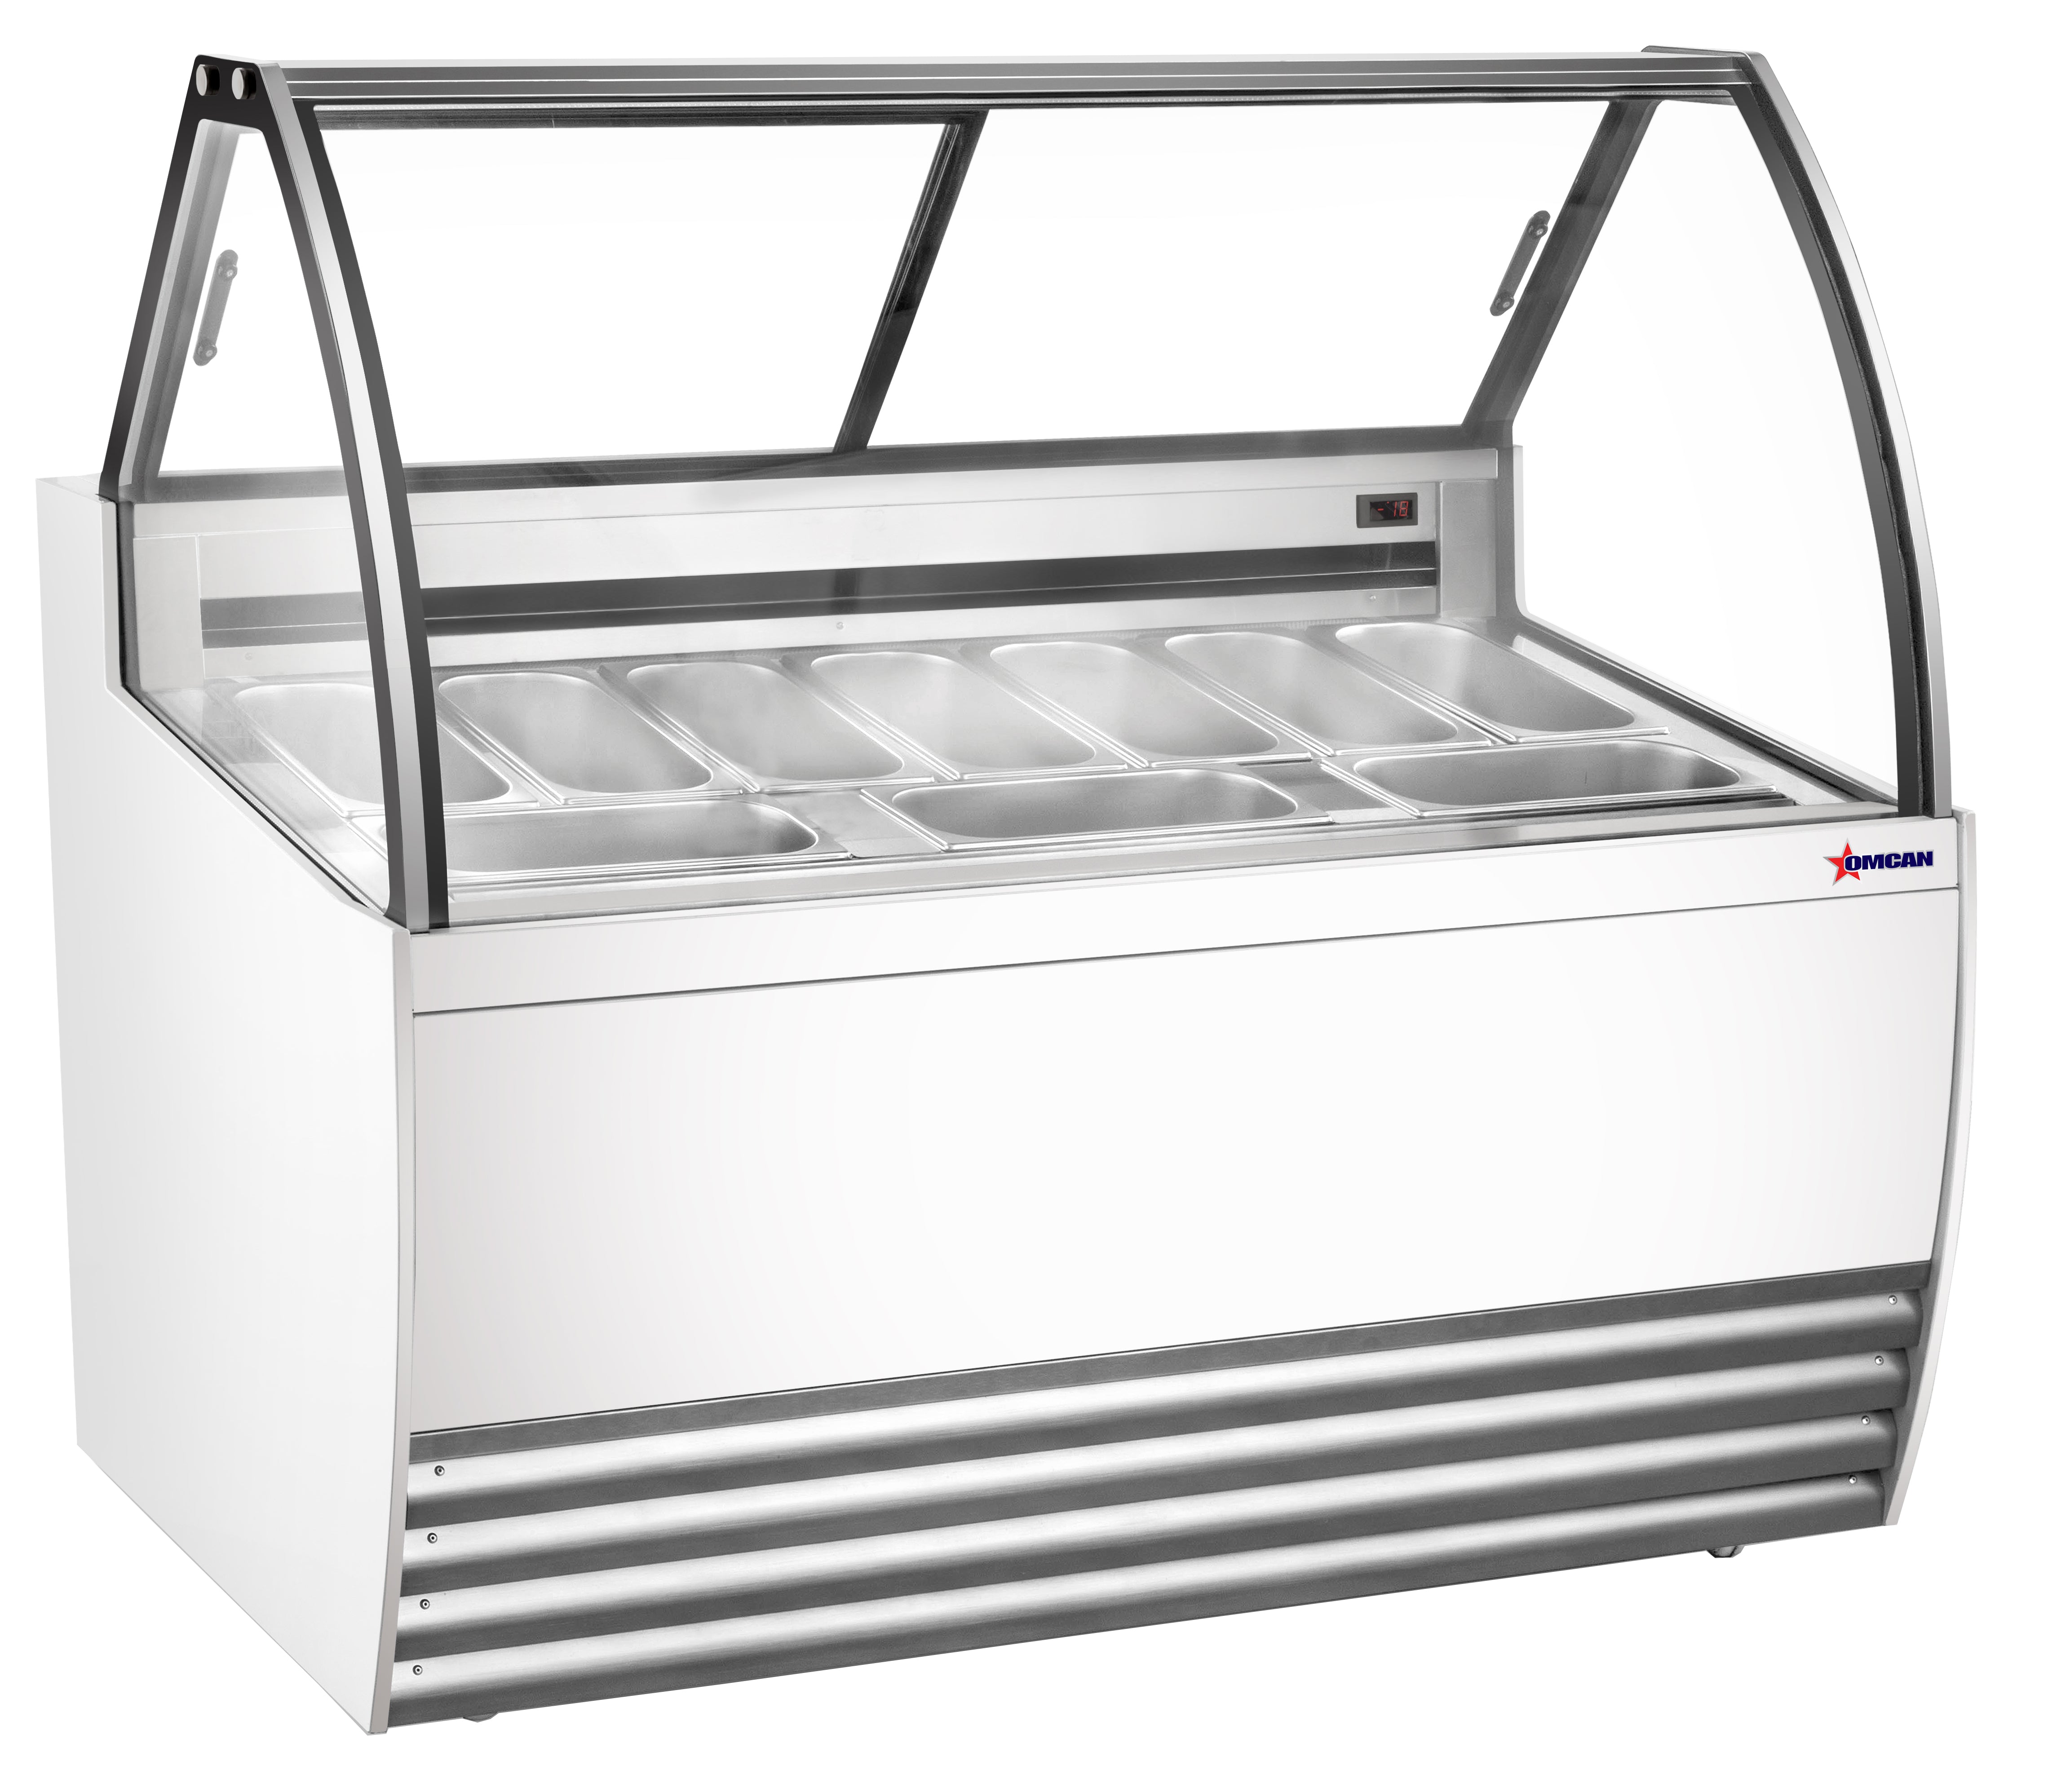 Omcan 47498 | 55" Wide White Curved Glass Gelato Display Case